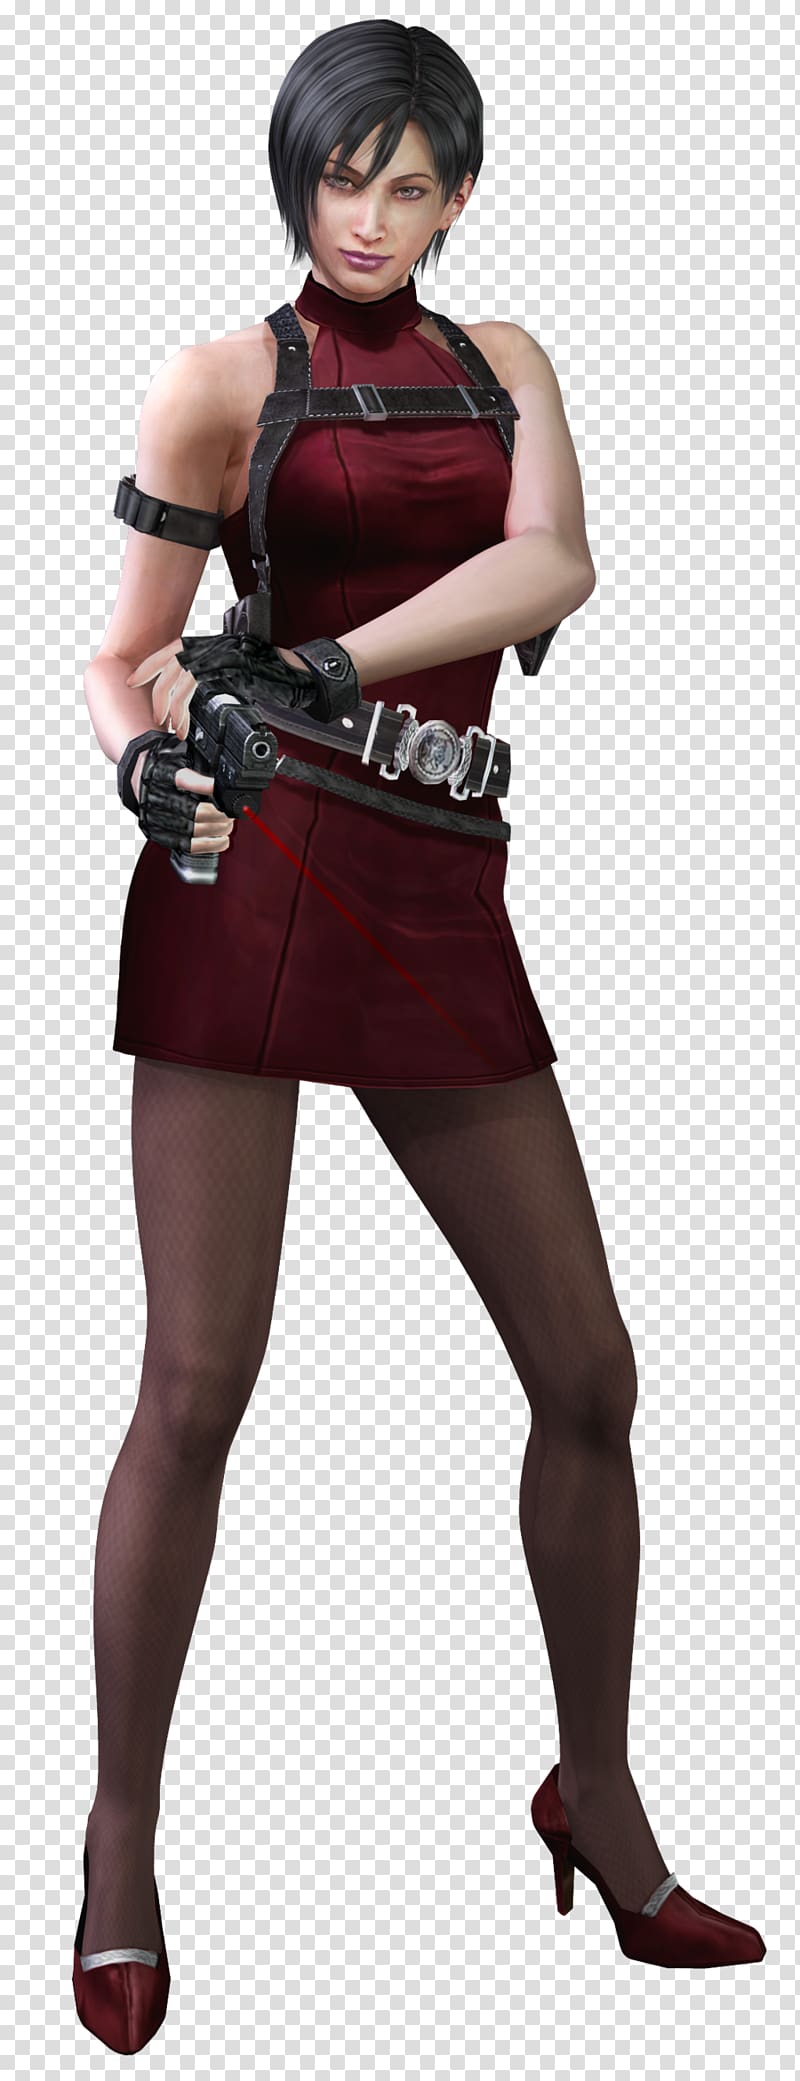 Resident Evil 2 Resident Evil 6 Resident Evil 4 Resident Evil: The Umbrella Chronicles, resident evil transparent background PNG clipart